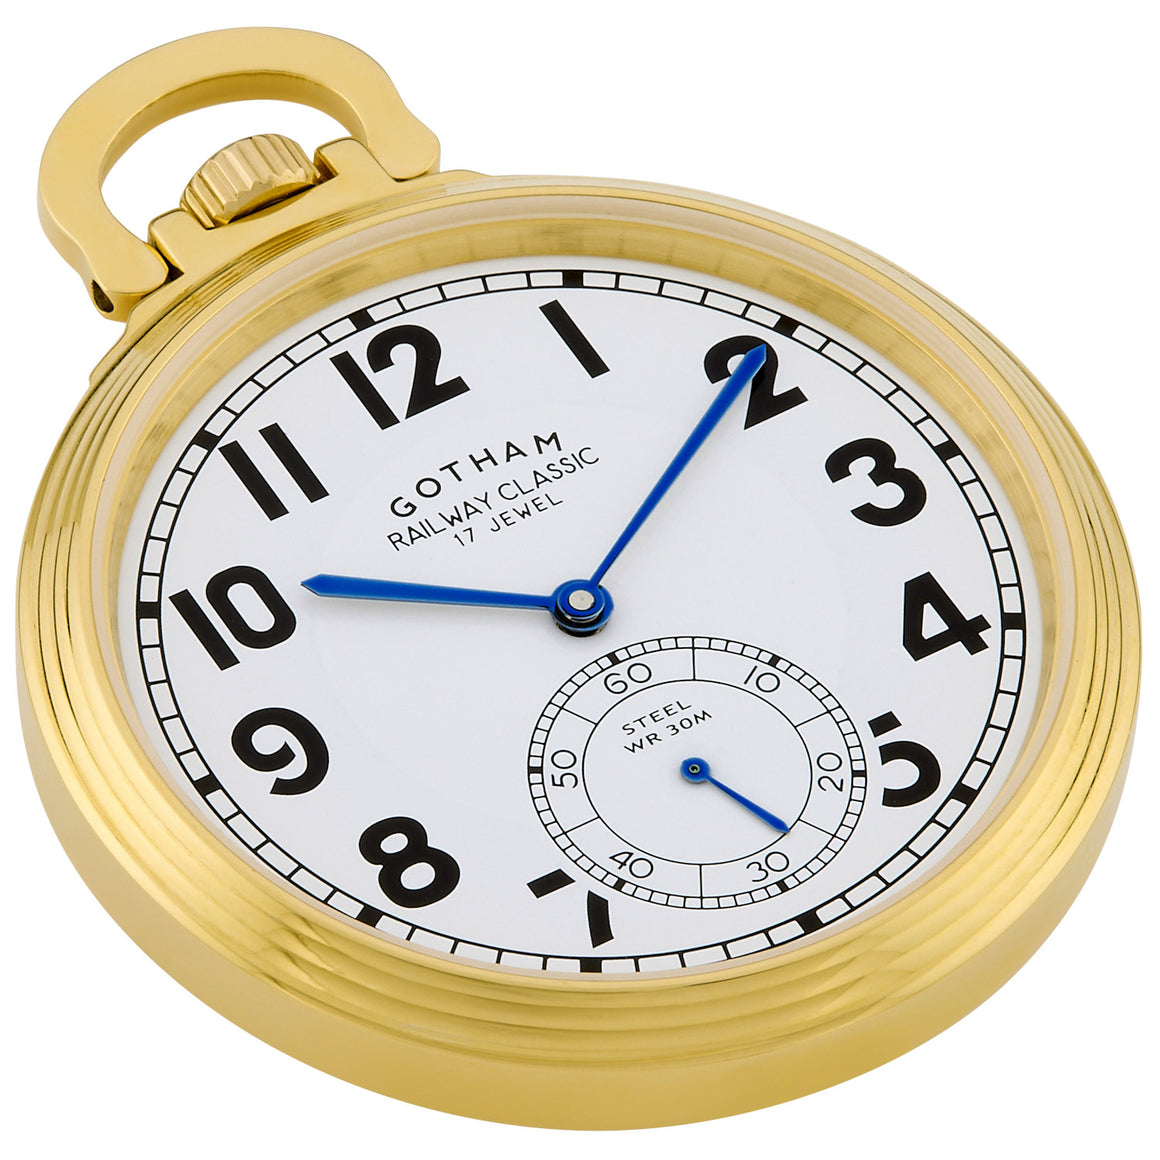 Gotham Men's Gold Plated Stainless Steel Mechanical Hand Wind Railway Classic Nostalgia Series Pocket Watch # GWC14114G